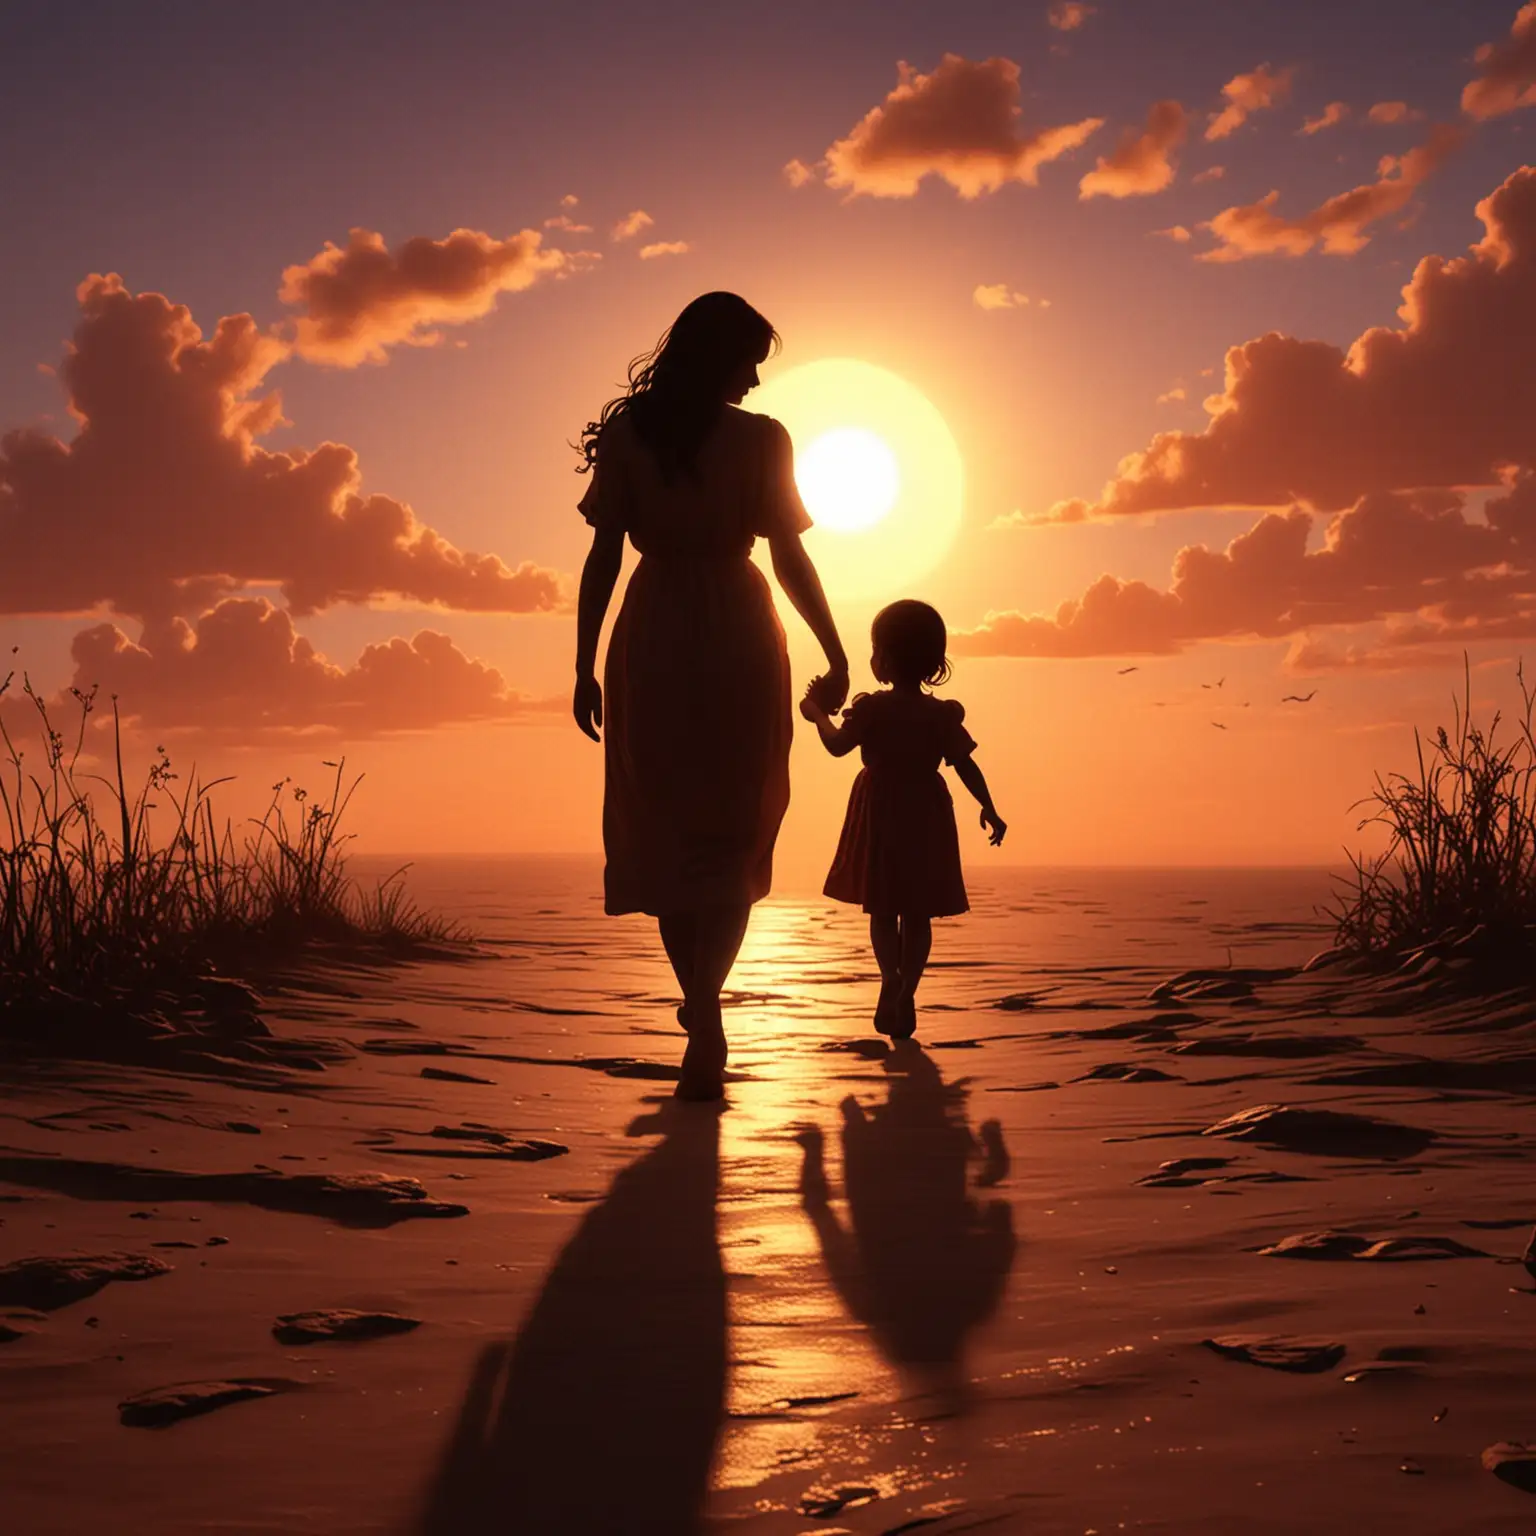 Craft an animation of a silhouette scene where a mother and child walk hand in hand into a sunset, with the sky transitioning from day to night, symbolizing the eternal love and guidance of mothers.